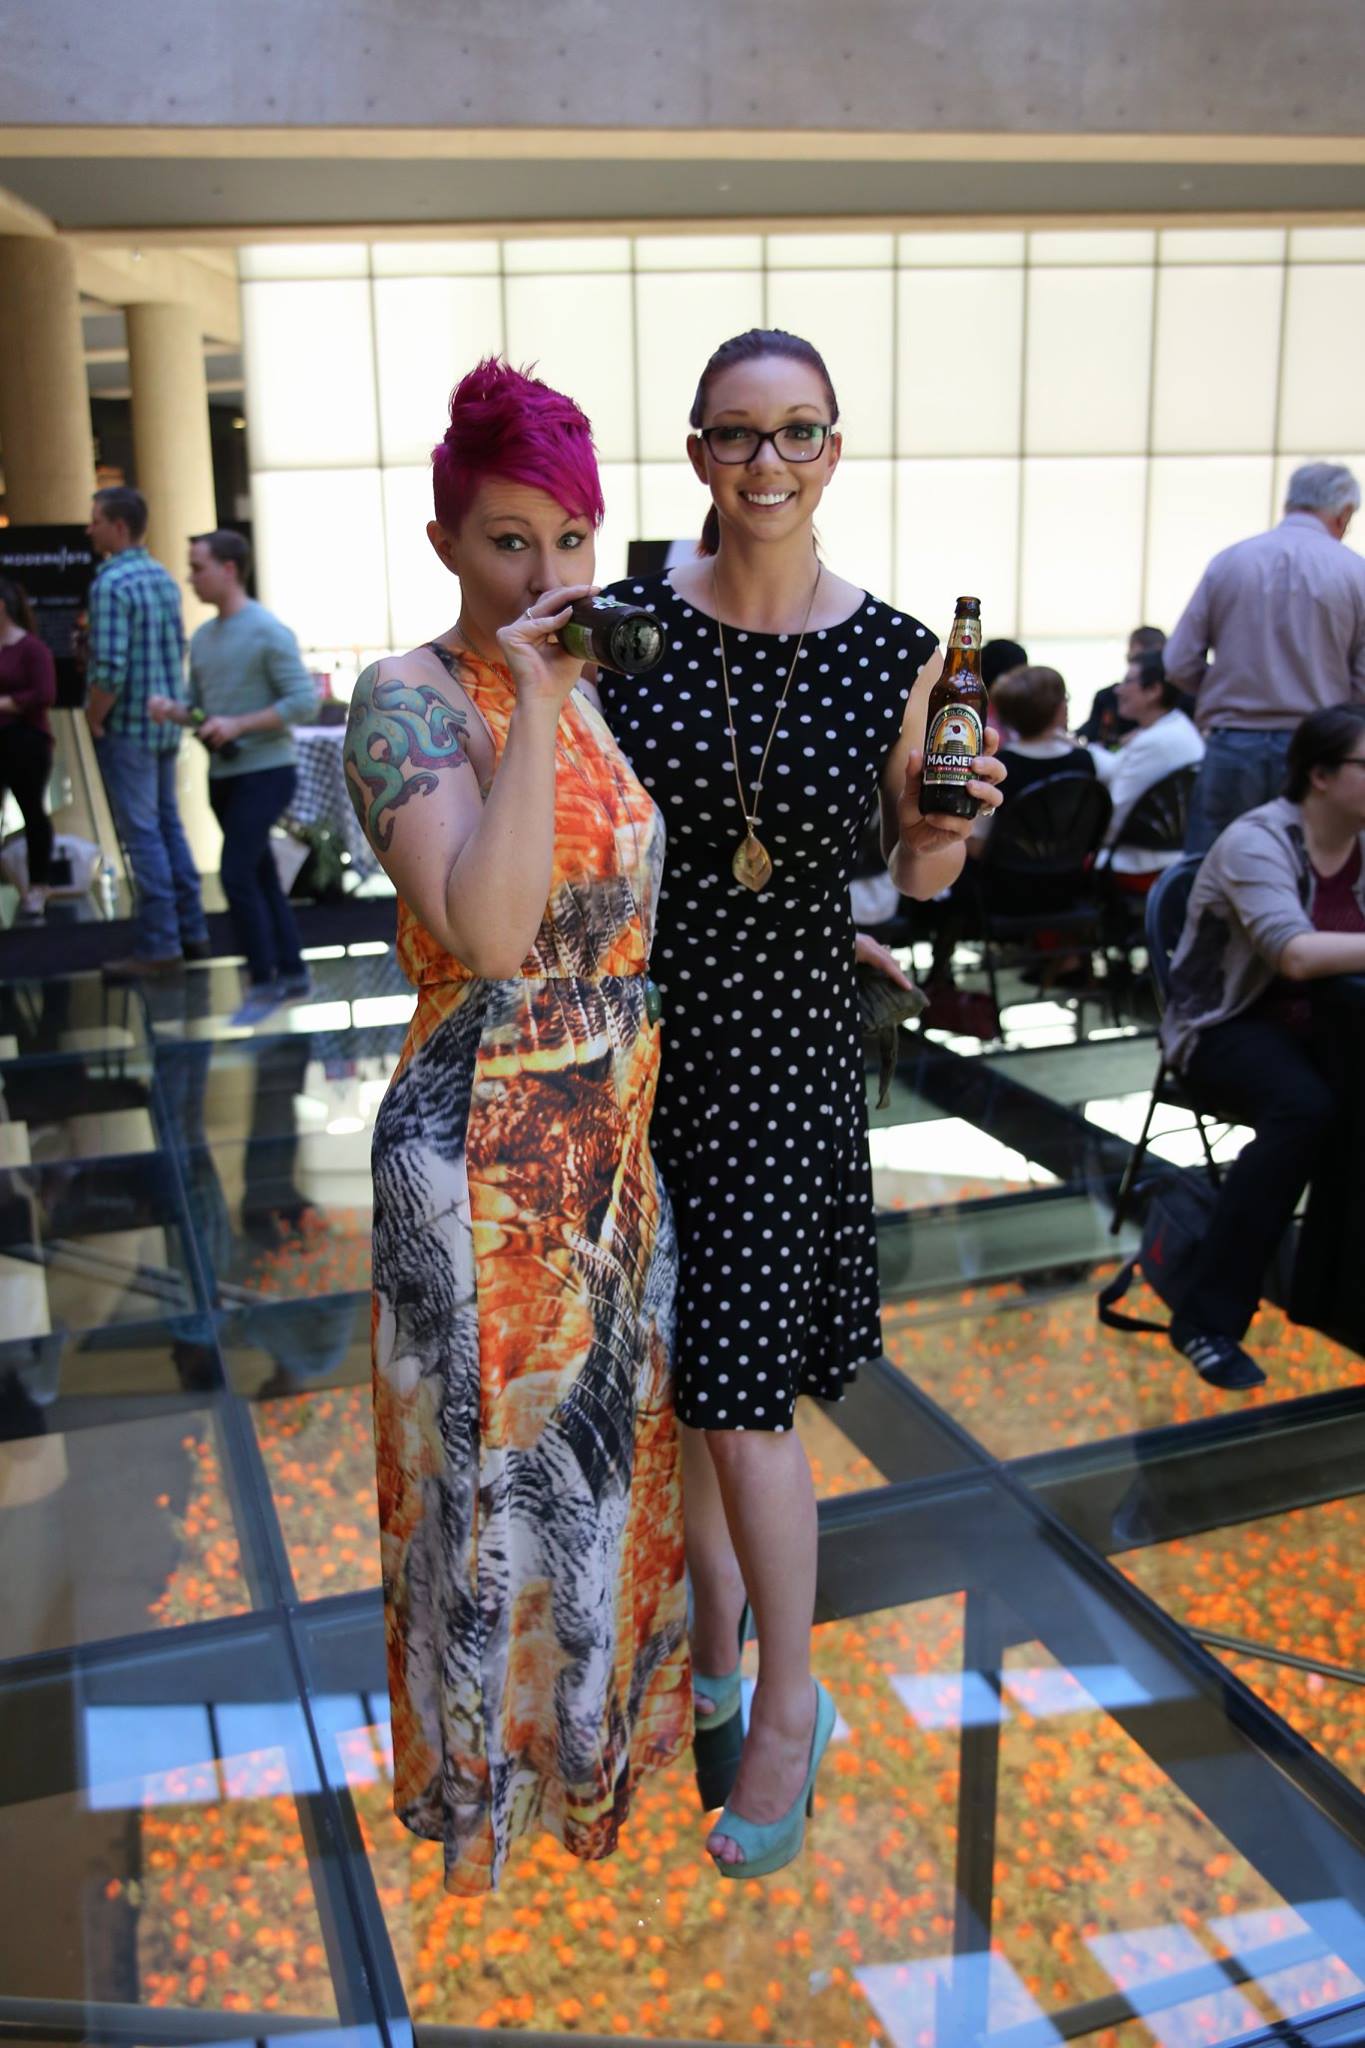 Modern photograph of two young white women in cocktail attire posing on the Glass Bridge. One woman has spiky pink hair and is drinking from a glass bottle of cider, while the other is smiling and holding her bottle up for the viewer to see.